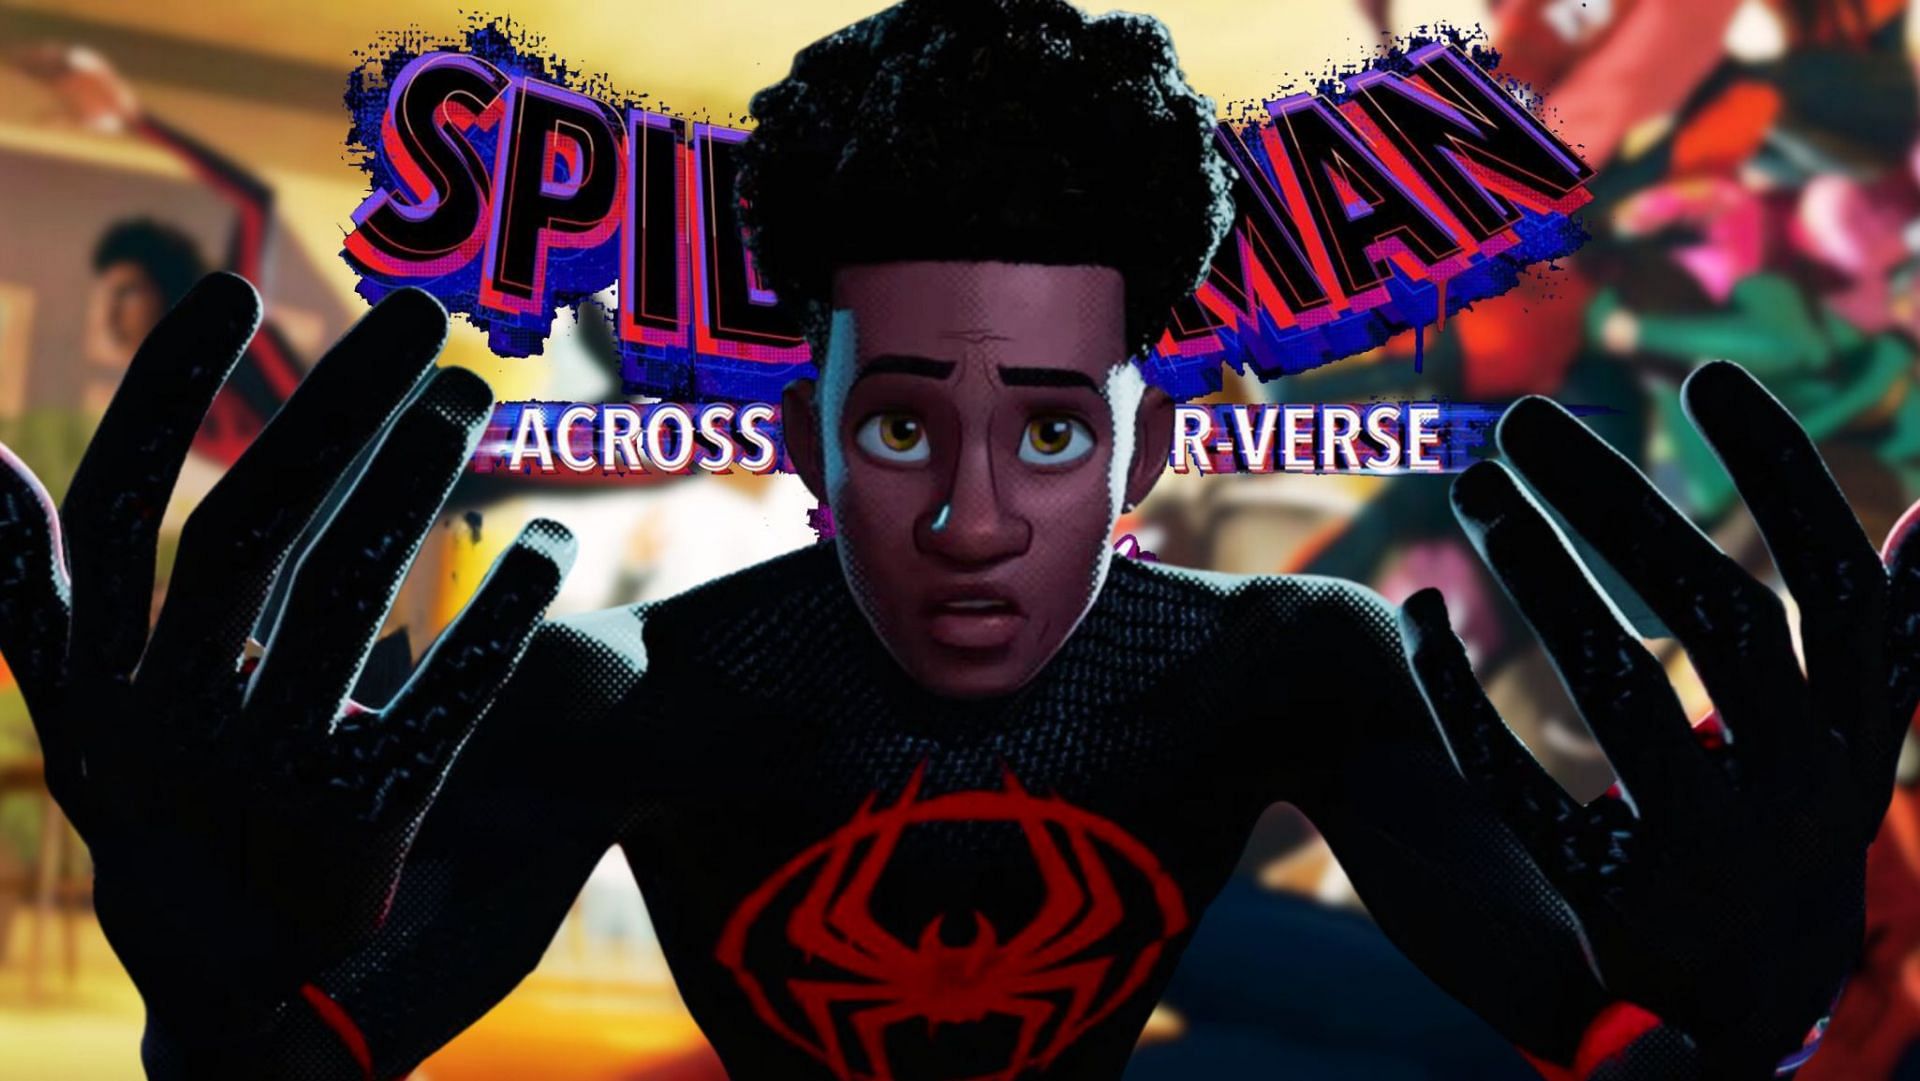 Miles Morales Web Swing Spider-Man: Across the Spider-Verse 4K